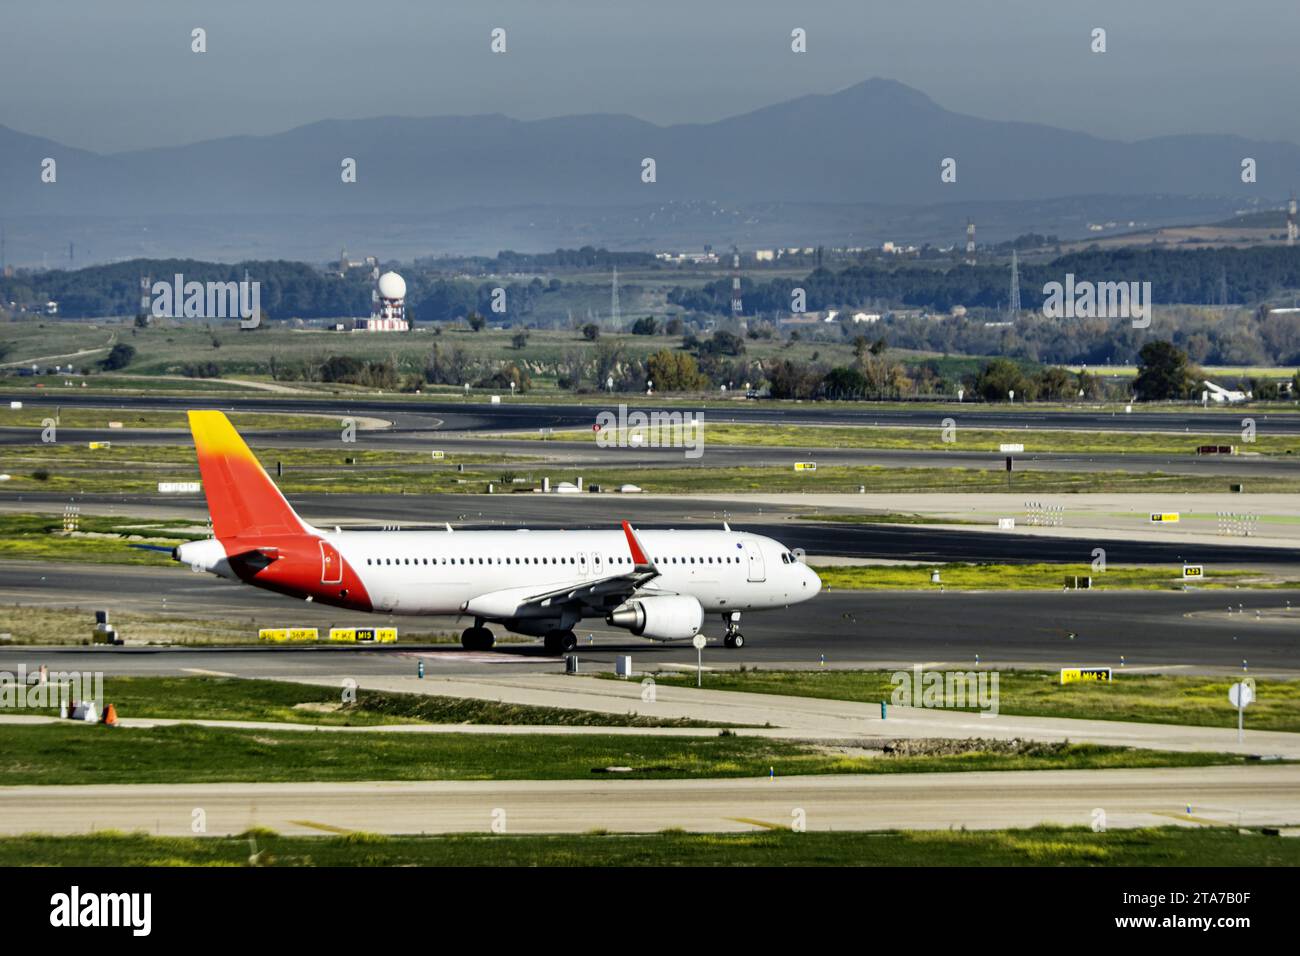 Airplanes transiting the runways approaching the takeoff area Stock Photo